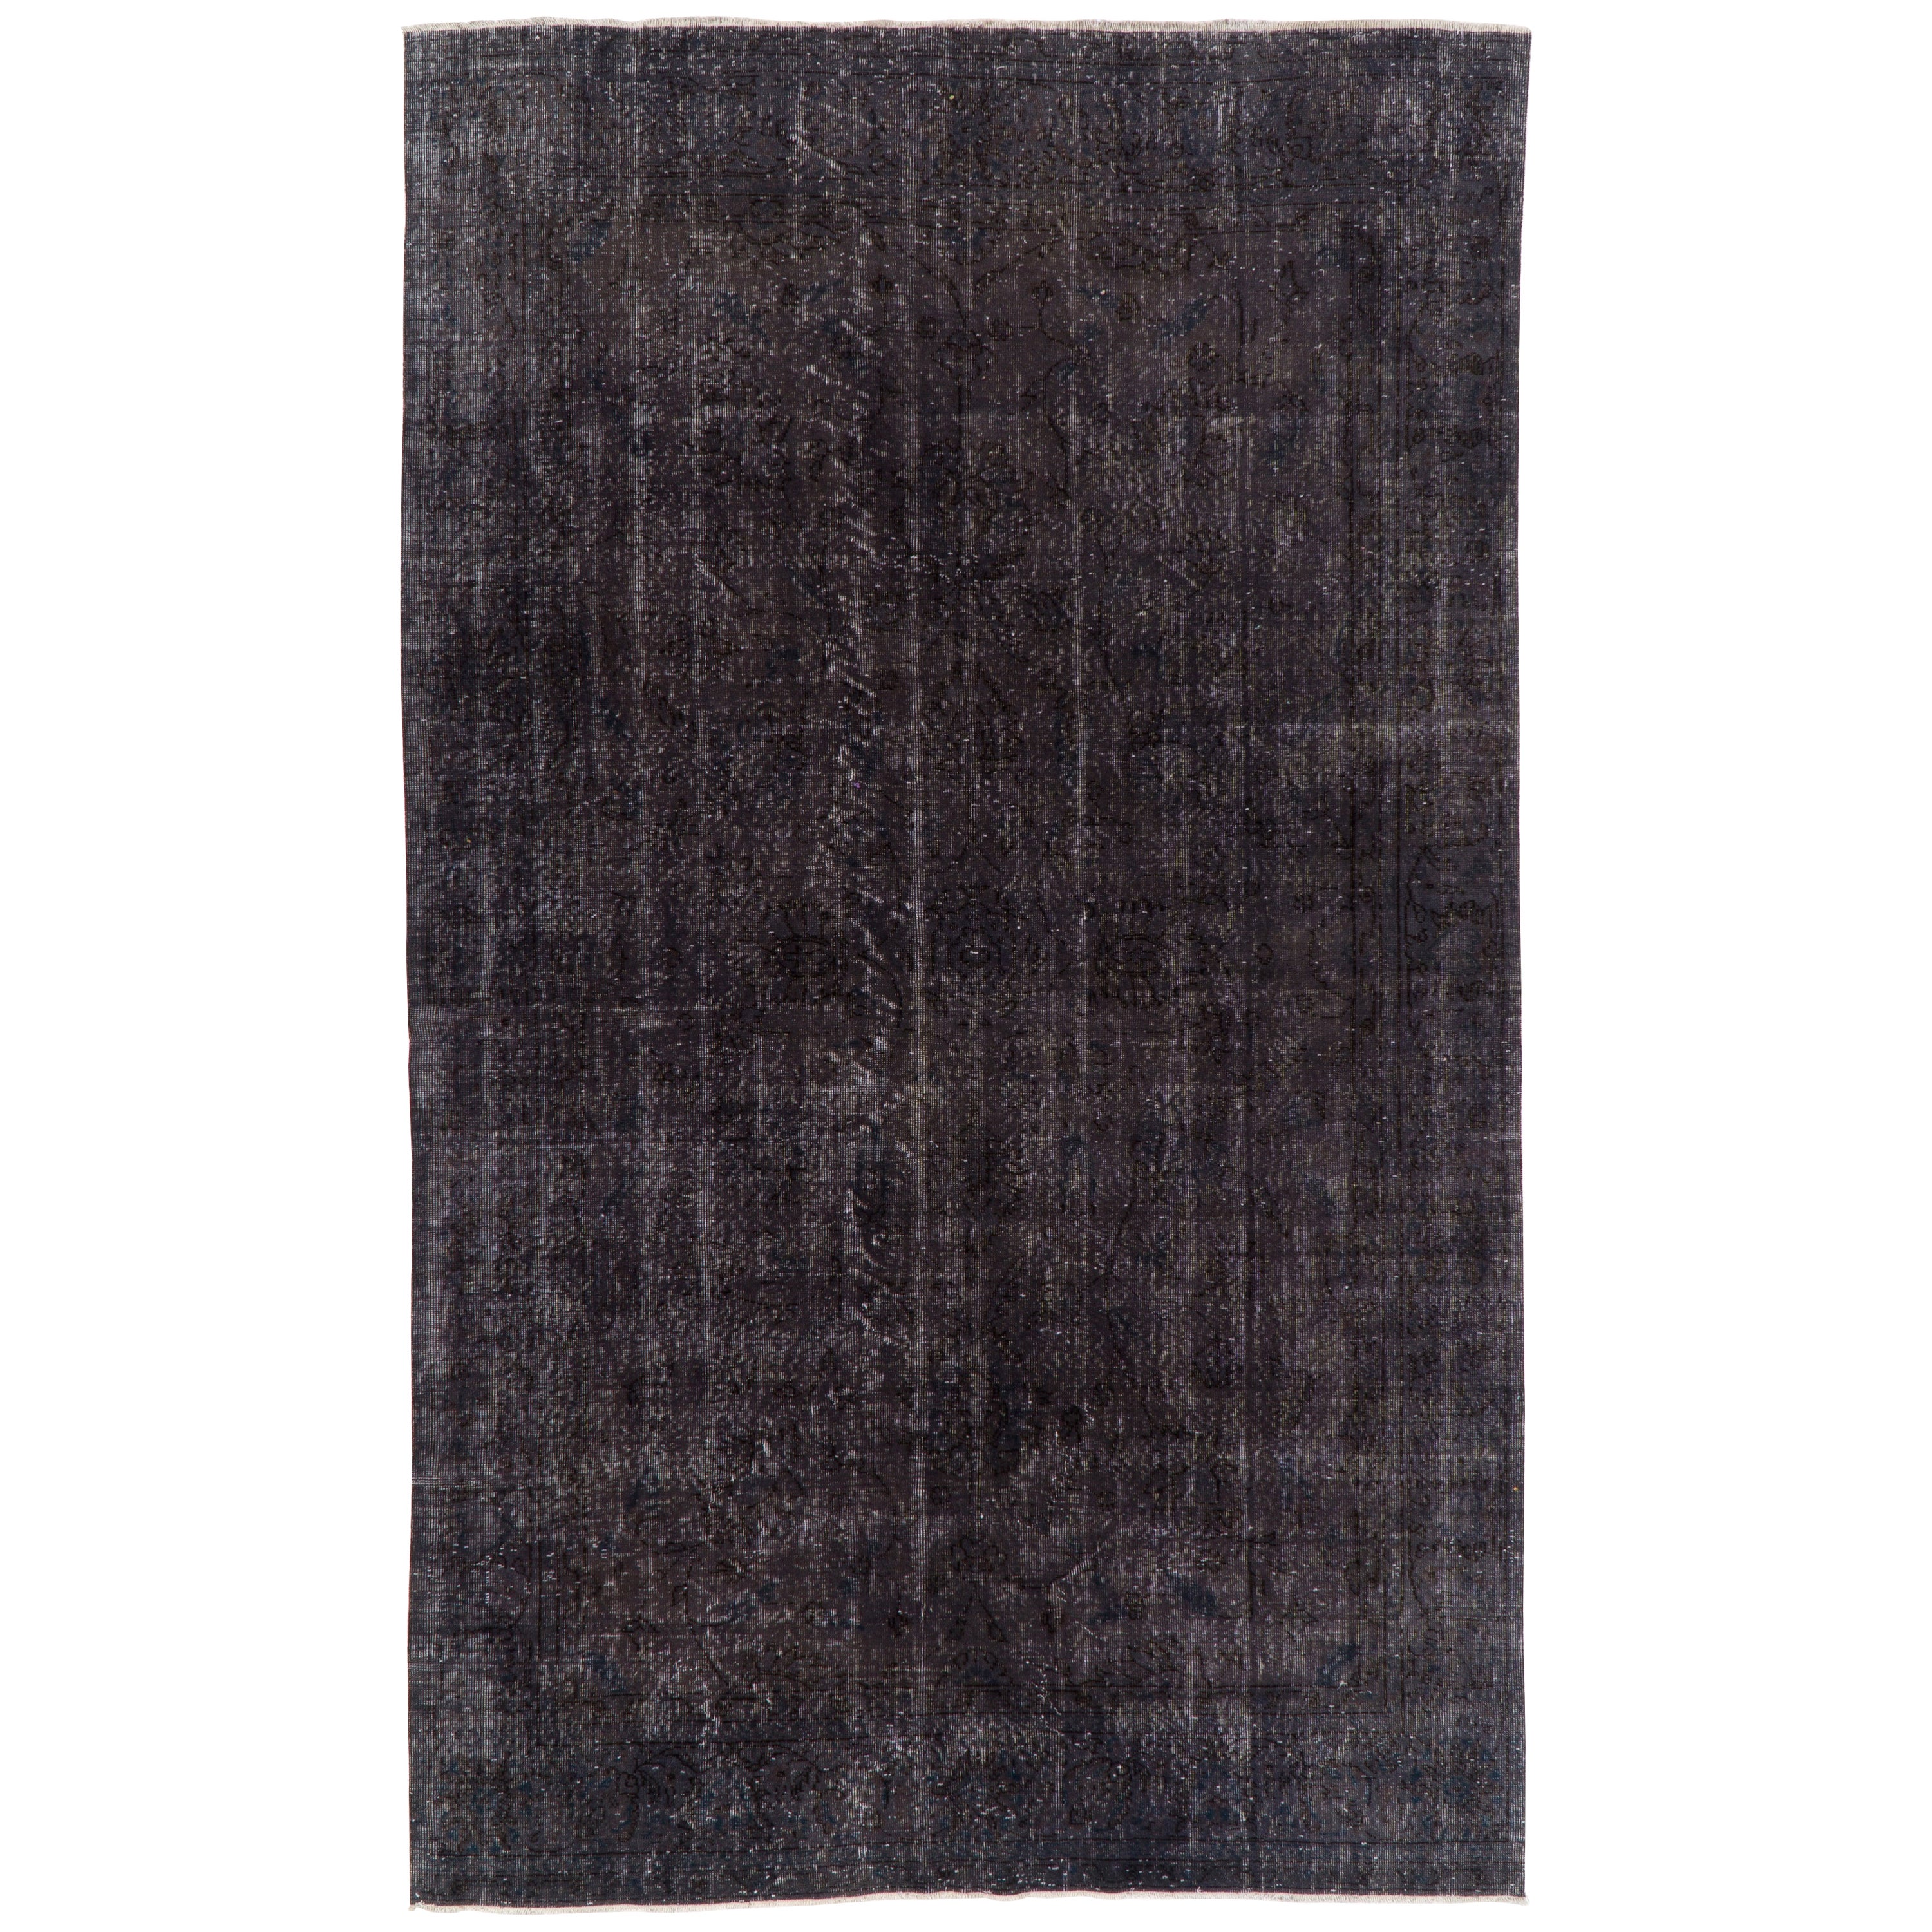 6.5x10.6 Ft Contemporary Handmade Central Anatolian Rug in Charcoal Gray & Black For Sale